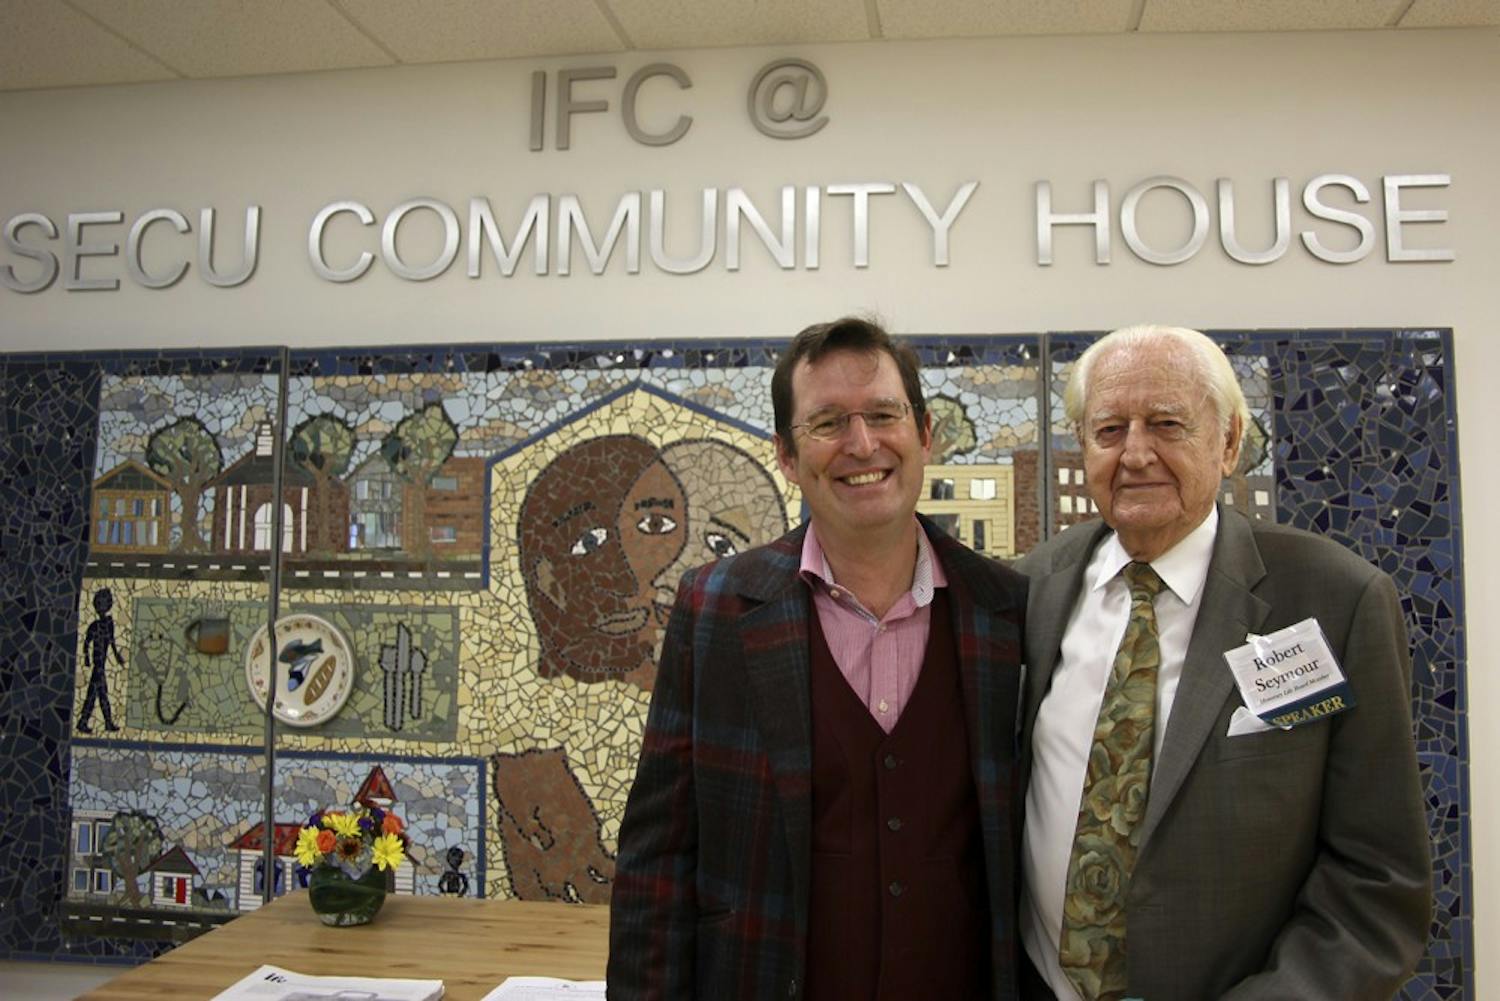 Inter-Faith Council opening house ceremony (Left, Michael Reinke, IFC Executive Director; Right, Robert Seymour, IFC Honorary Life Board Member)